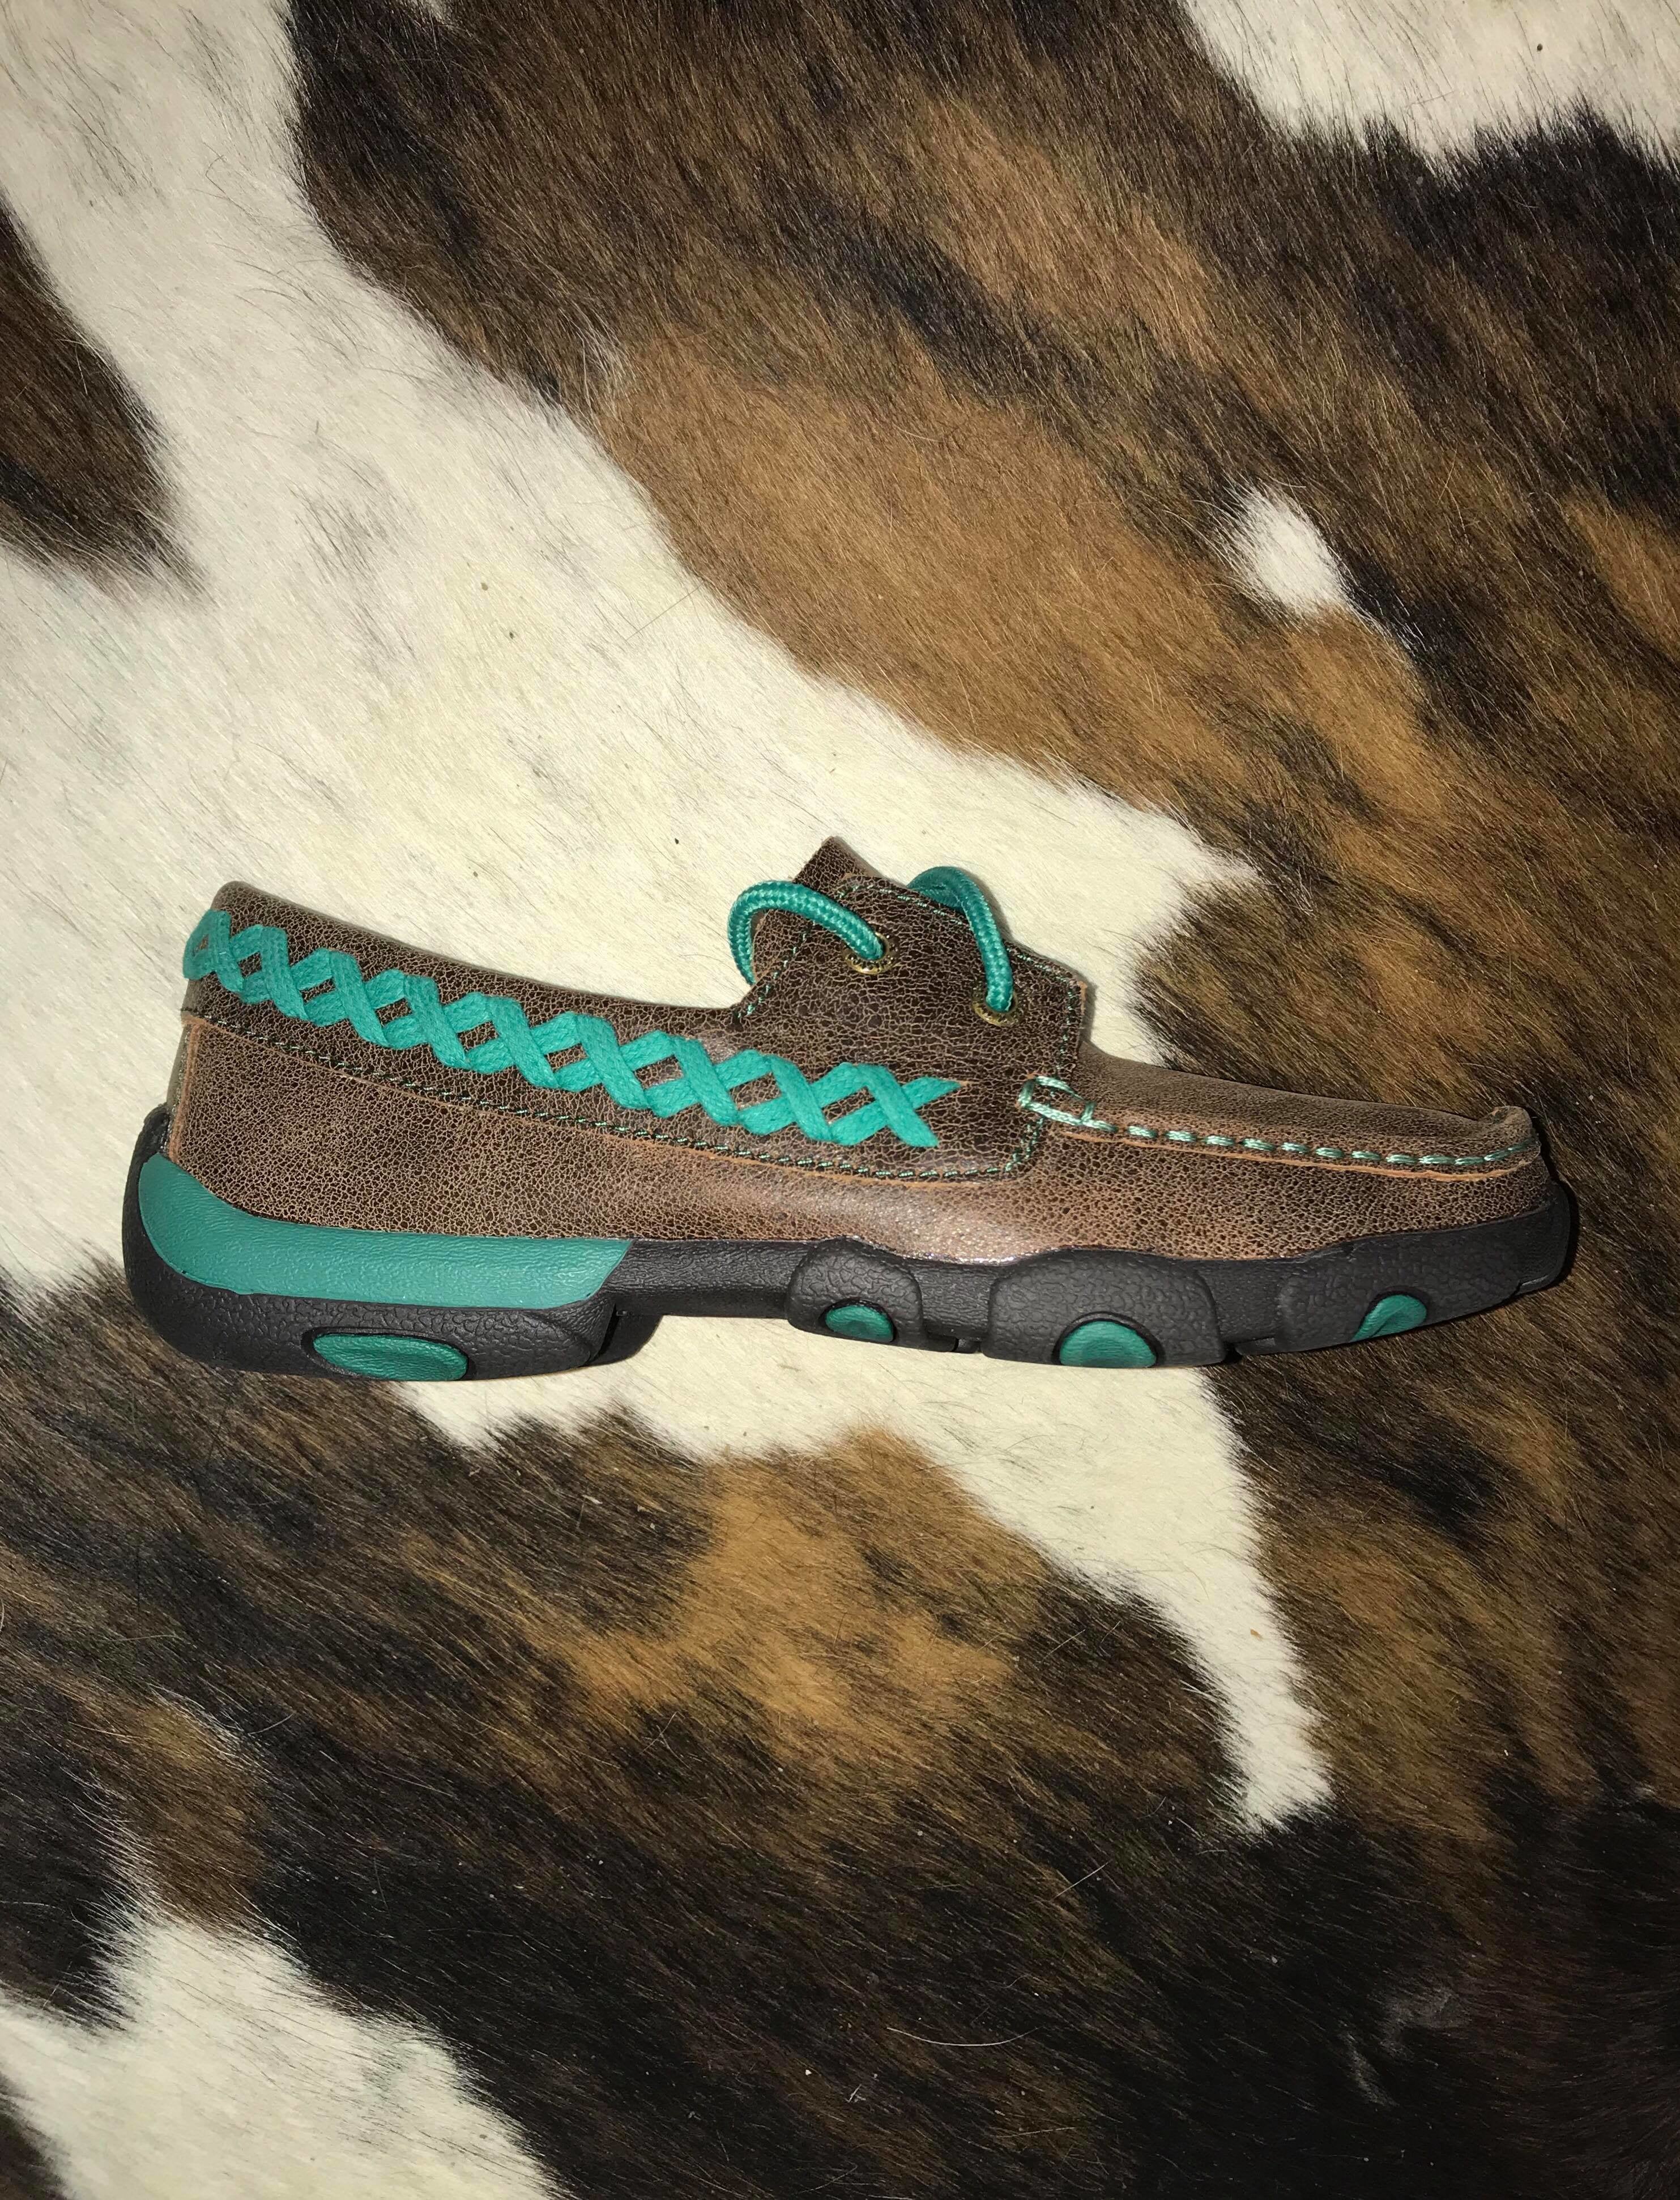 RM Tack Exclusive Turquoise Driving Moc - RM Tack & Apparel